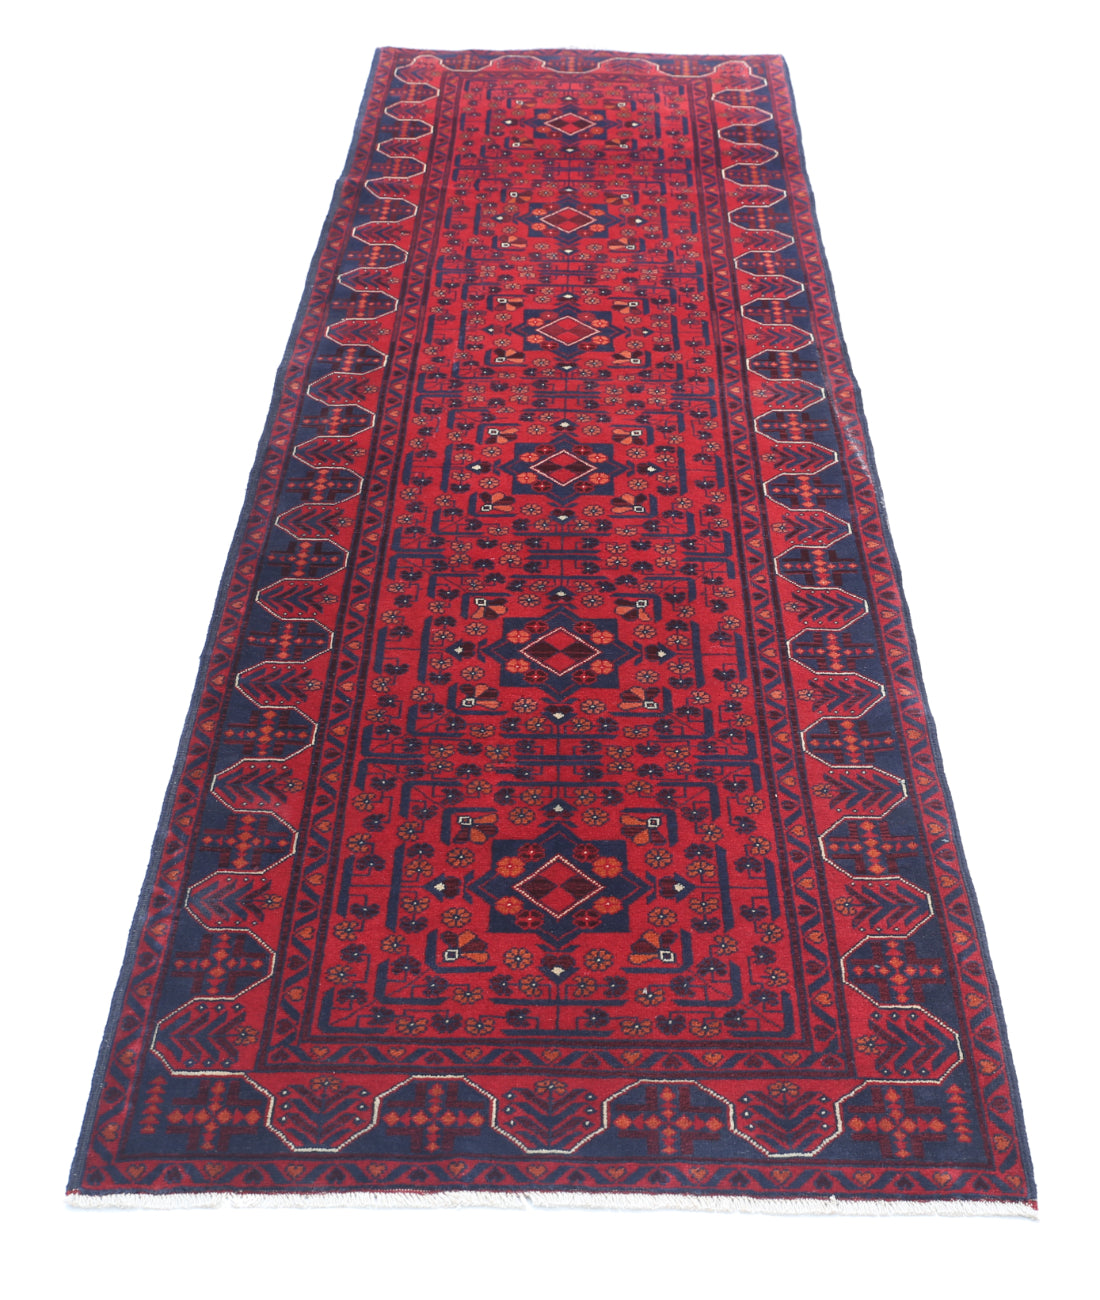 Hand Knotted Afghan Khamyab Wool Rug - 2'8'' x 9'6'' 2'8'' x 9'6'' (80 X 285) / Red / Red